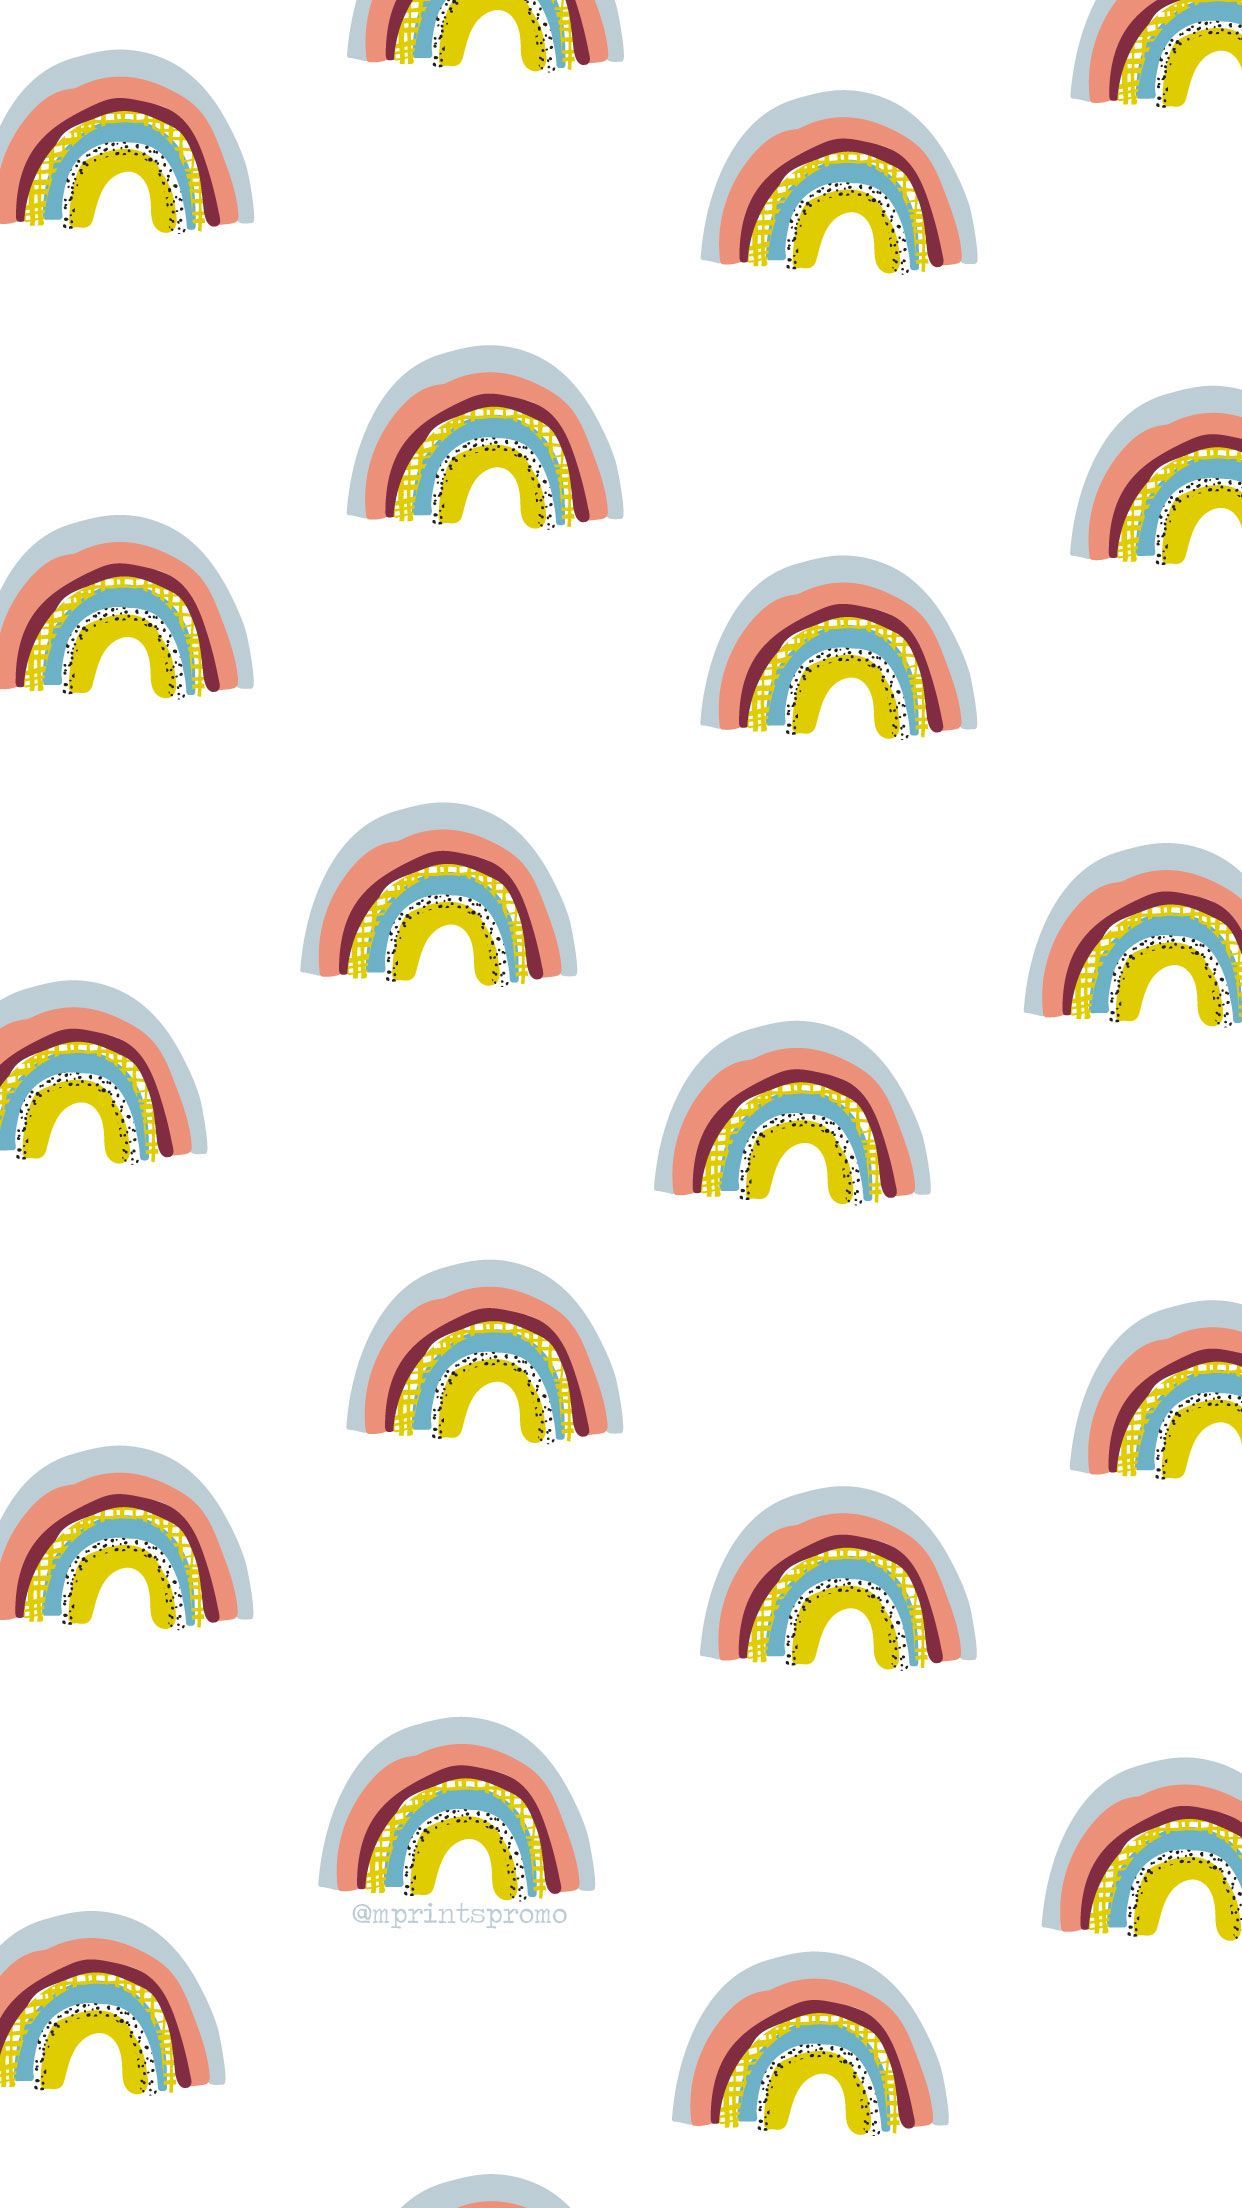 iPhone Wallpaper. Rainbow wallpaper, Promotional products marketing, Wallpaper free download